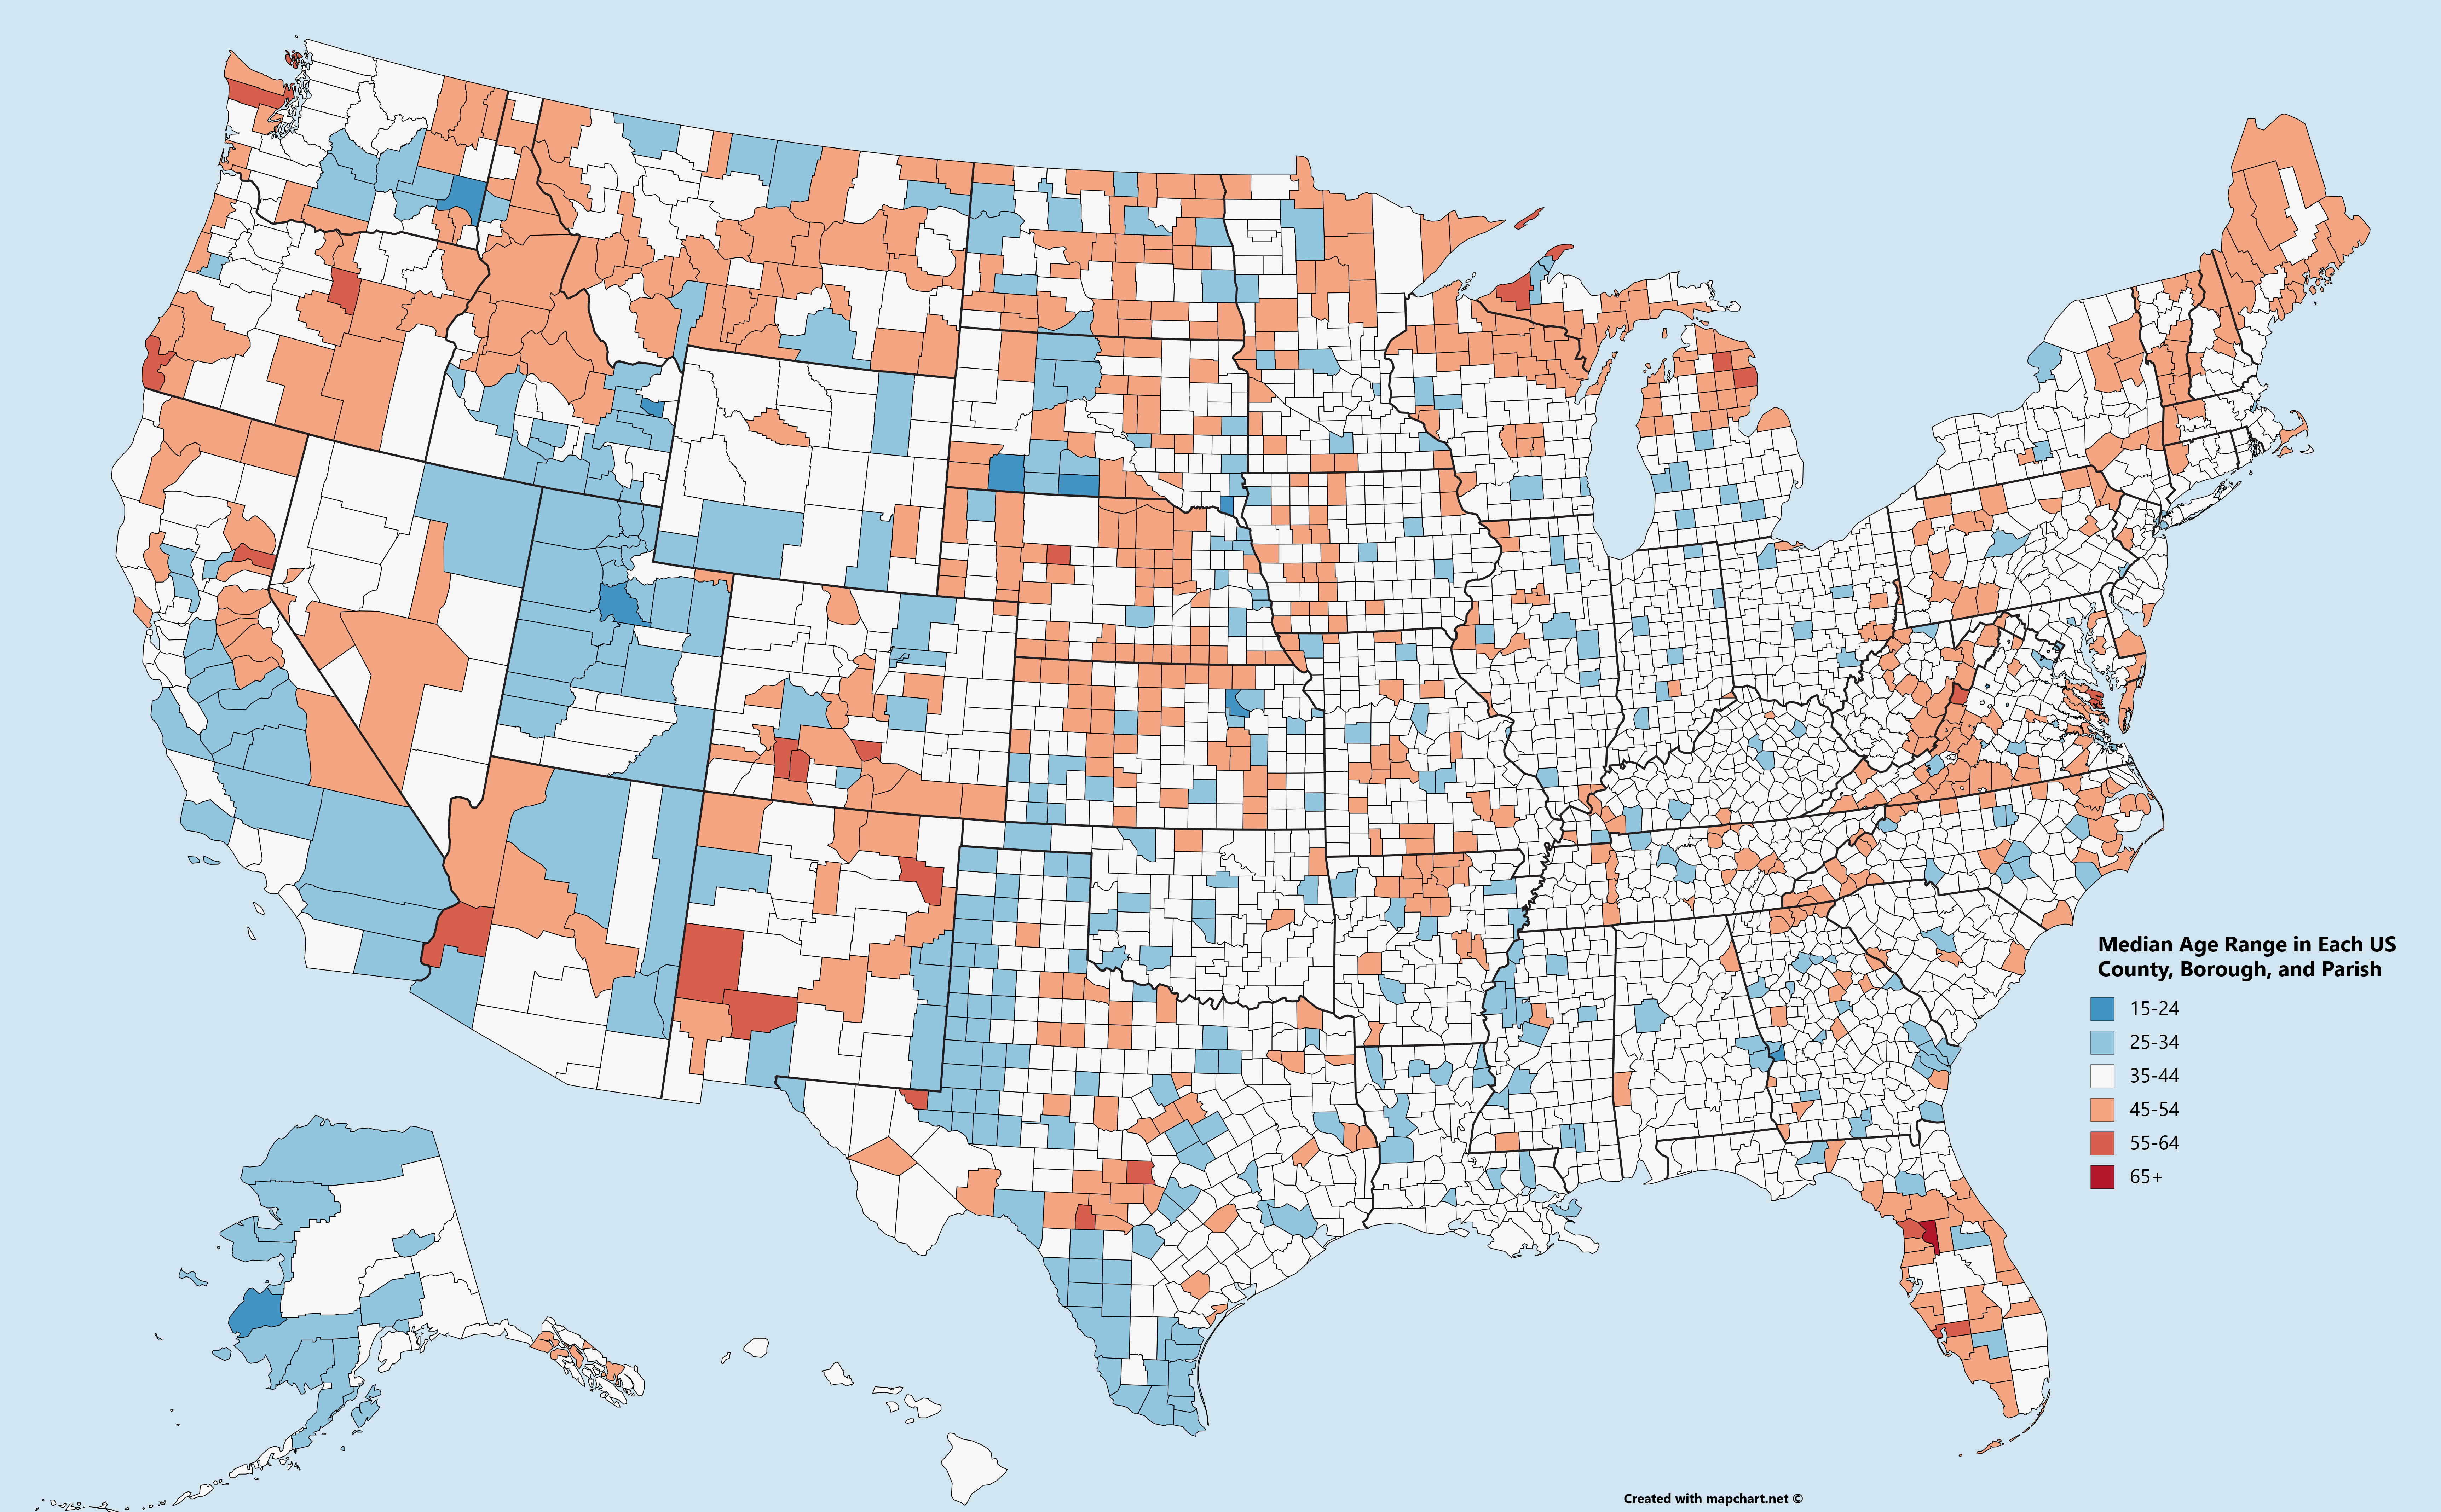 Mapped: The Median Age in Every U.S. County